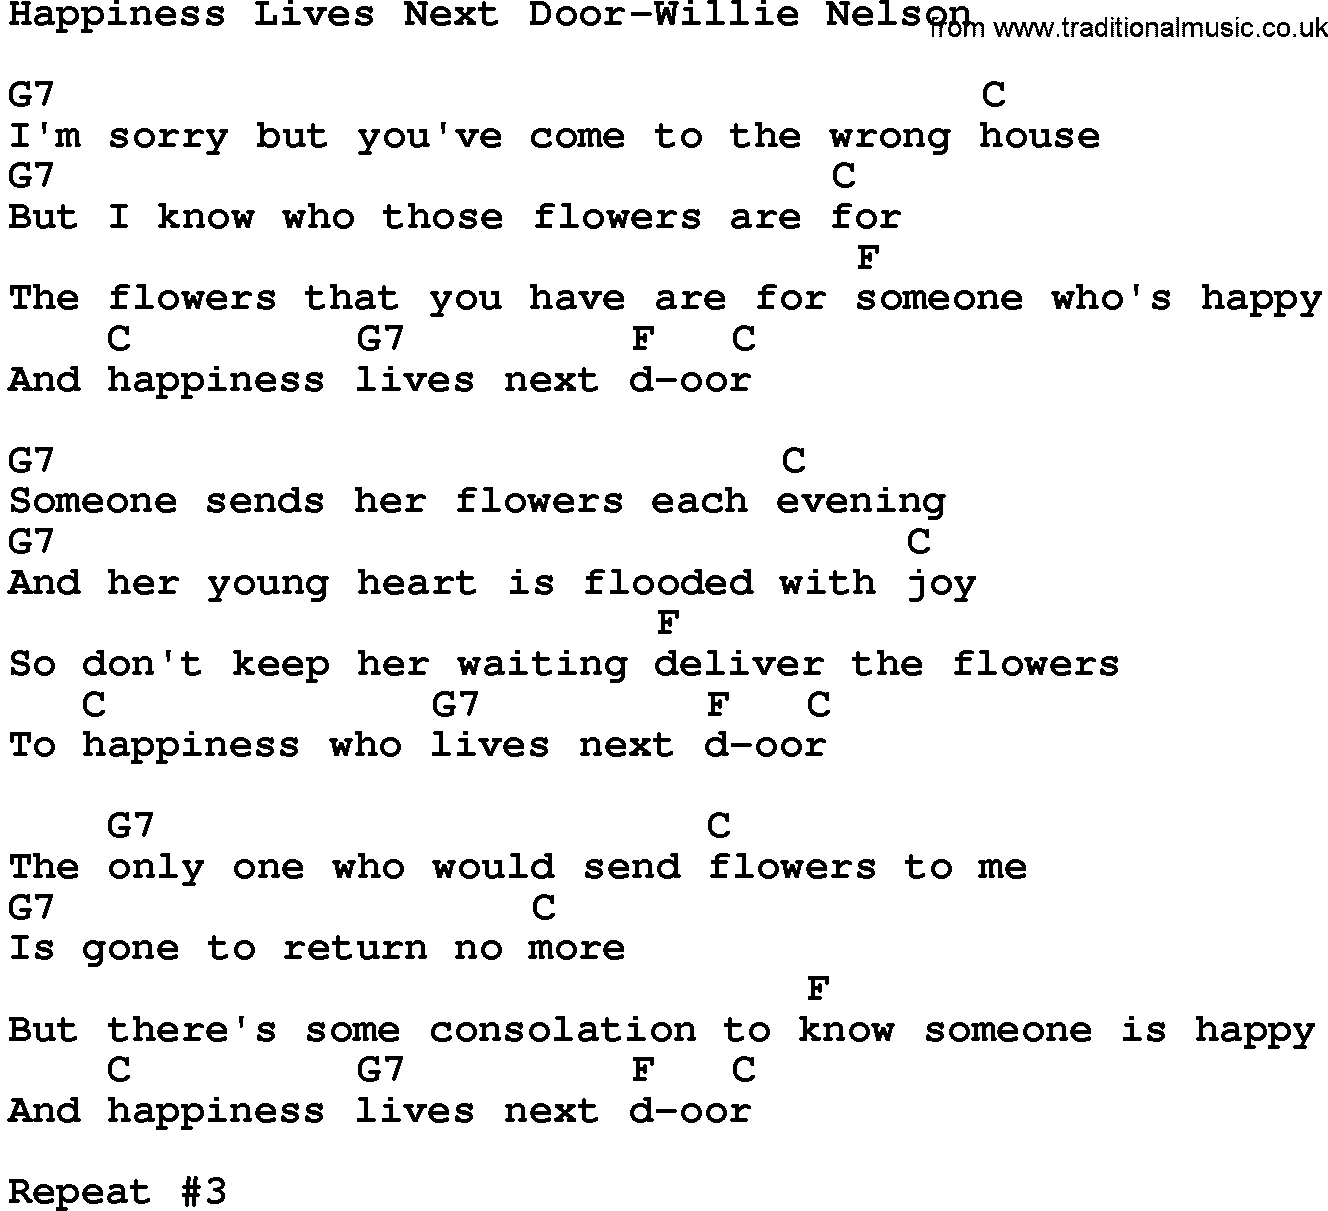 Country music song: Happiness Lives Next Door-Willie Nelson lyrics and chords